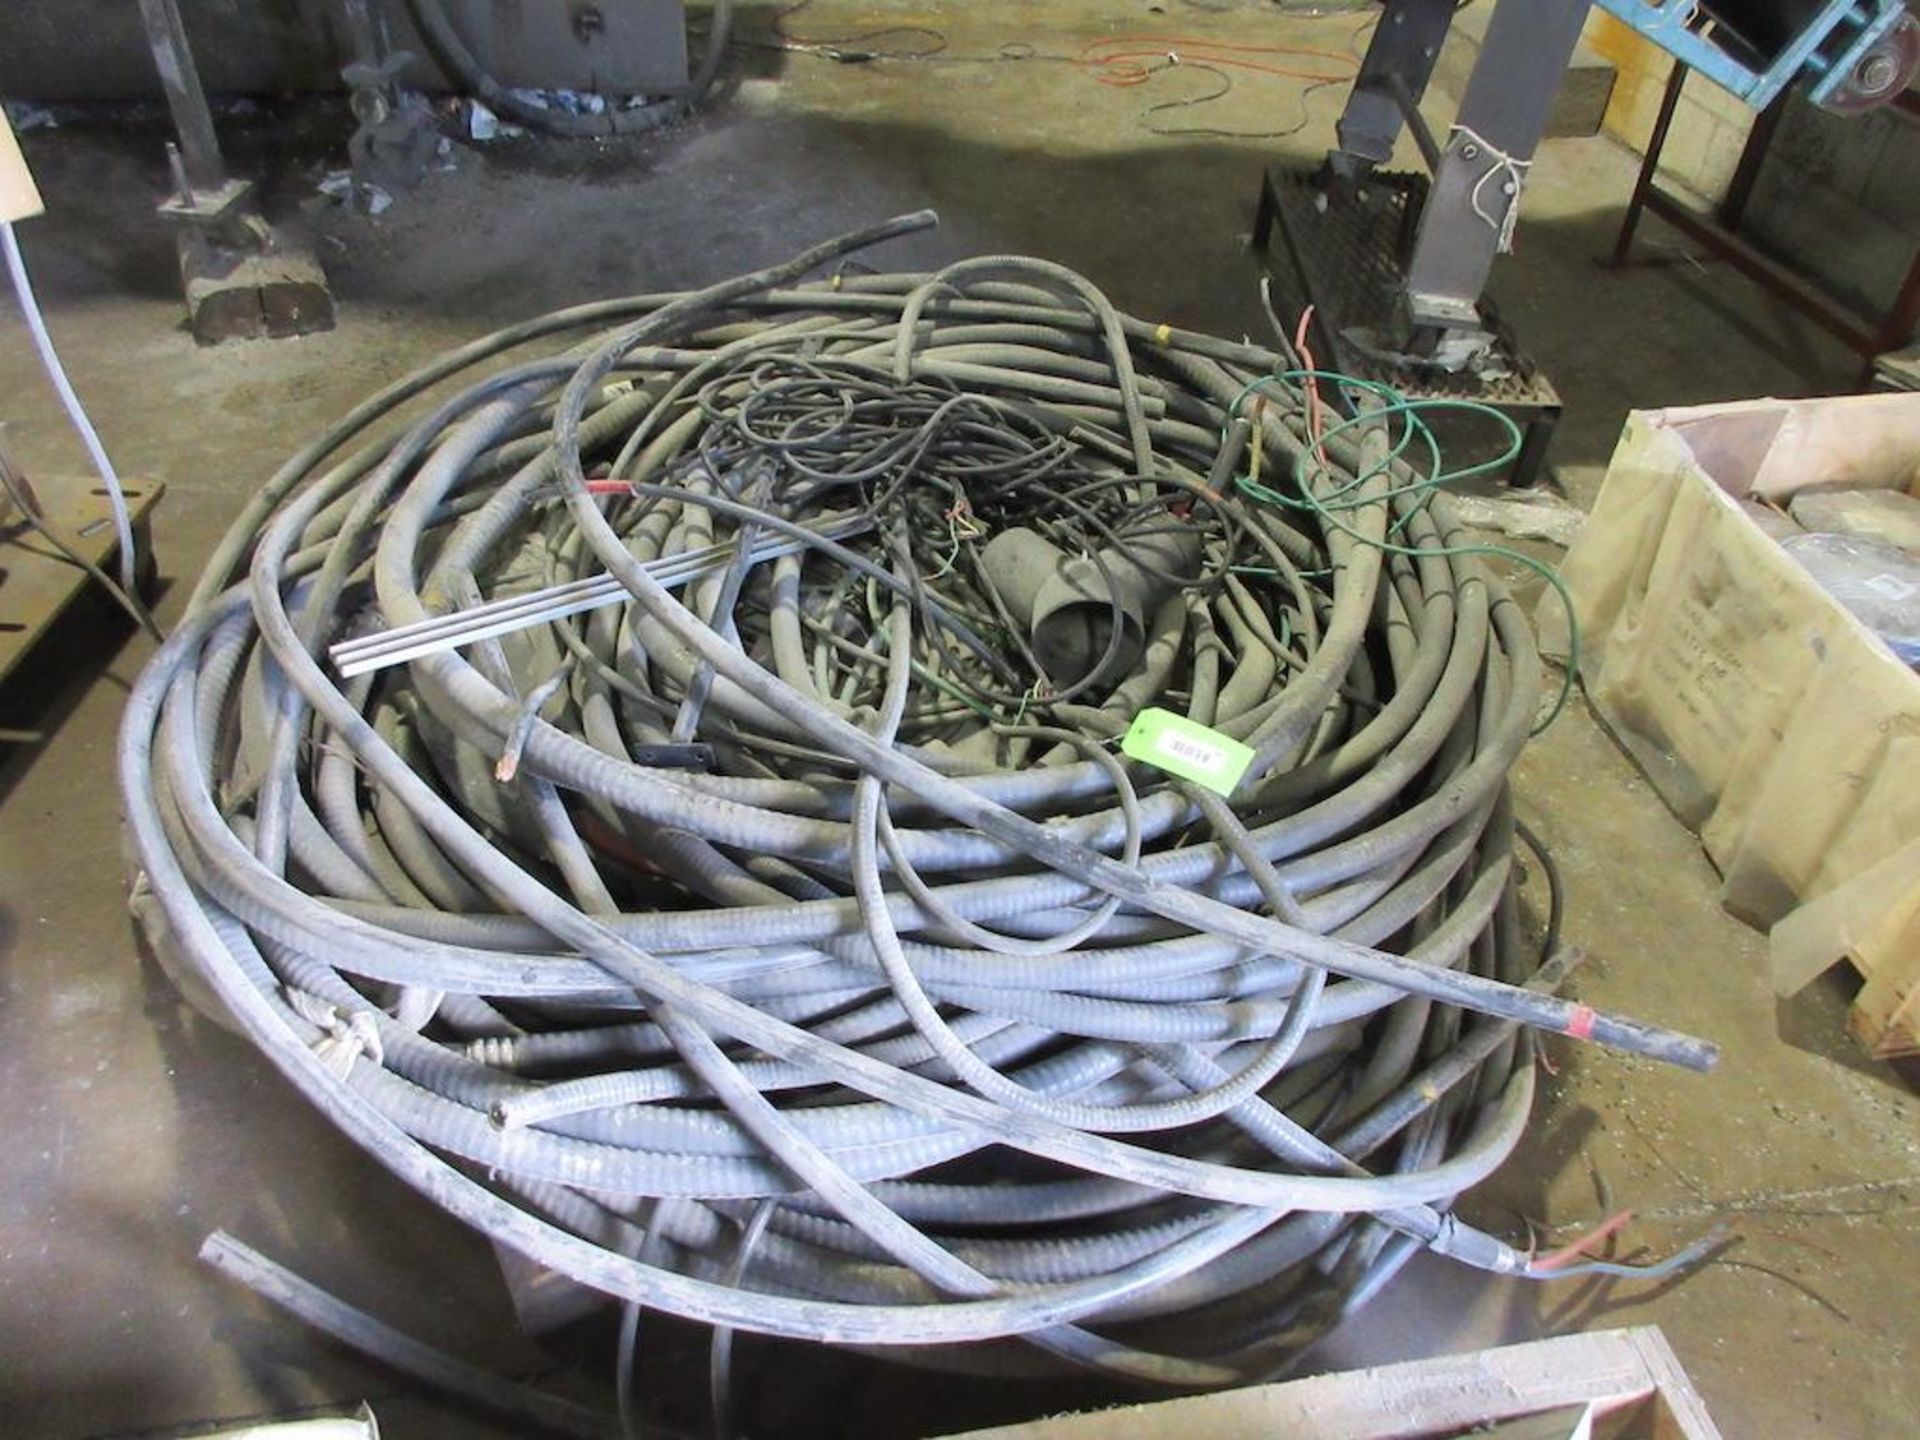 2 plastic Gaylords and 1 Pallet of Electrical Cabling, misc wires etc.